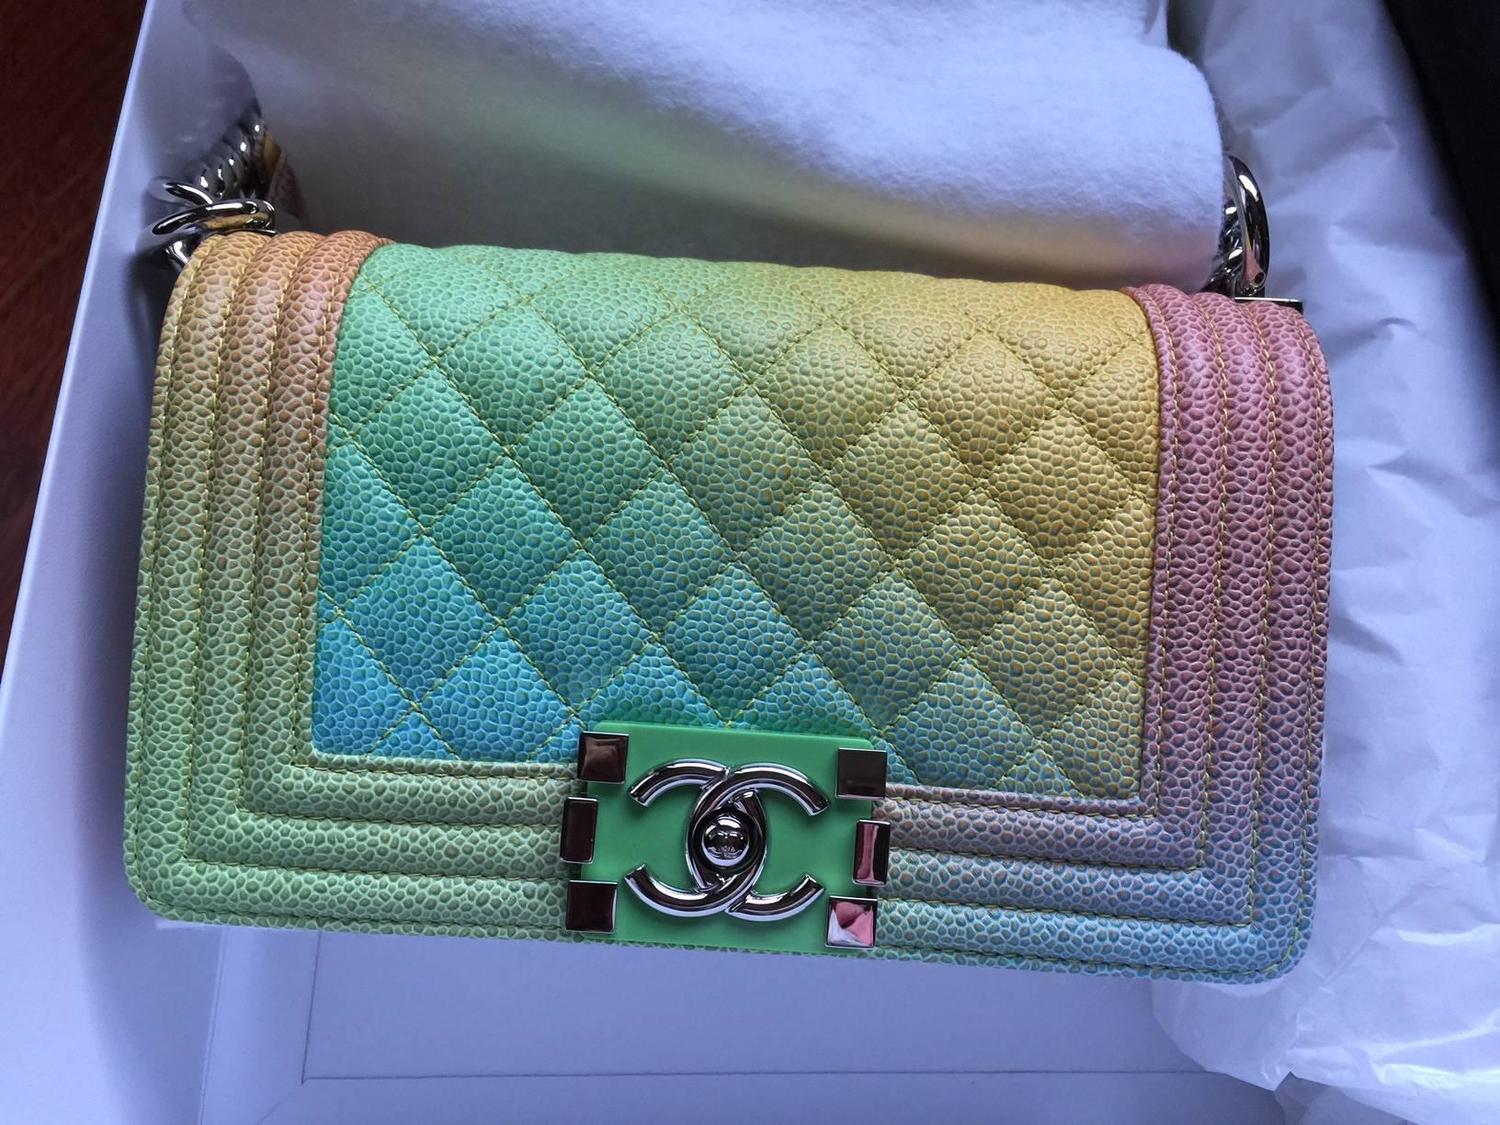 Chanel Rainbow Chanel Boy Handbag Small &#39;17 Crossbody NEW Sold Out For Sale at 1stdibs